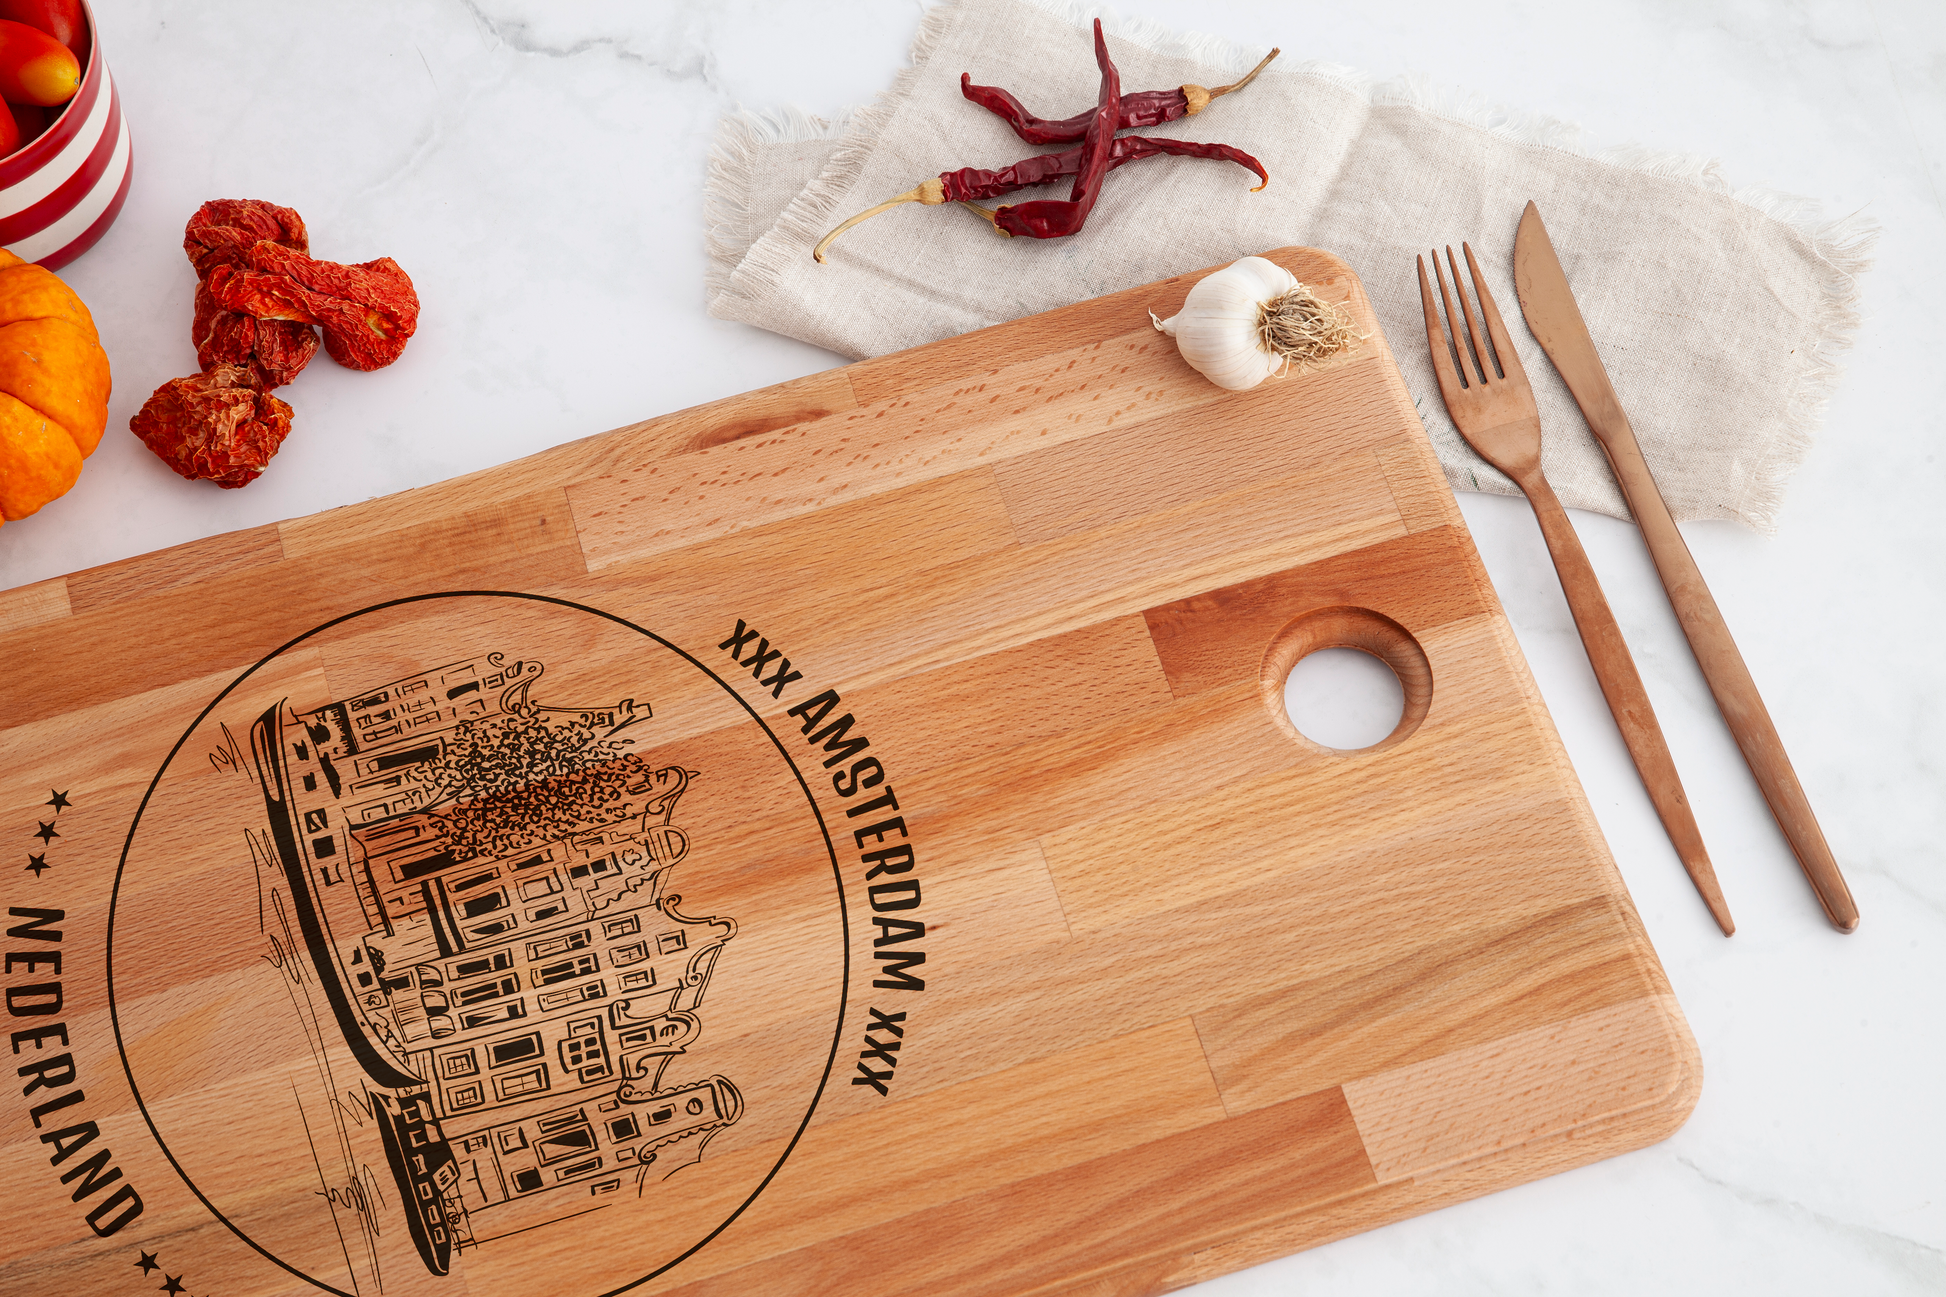 Amsterdam, Houses, cutting board, close-up